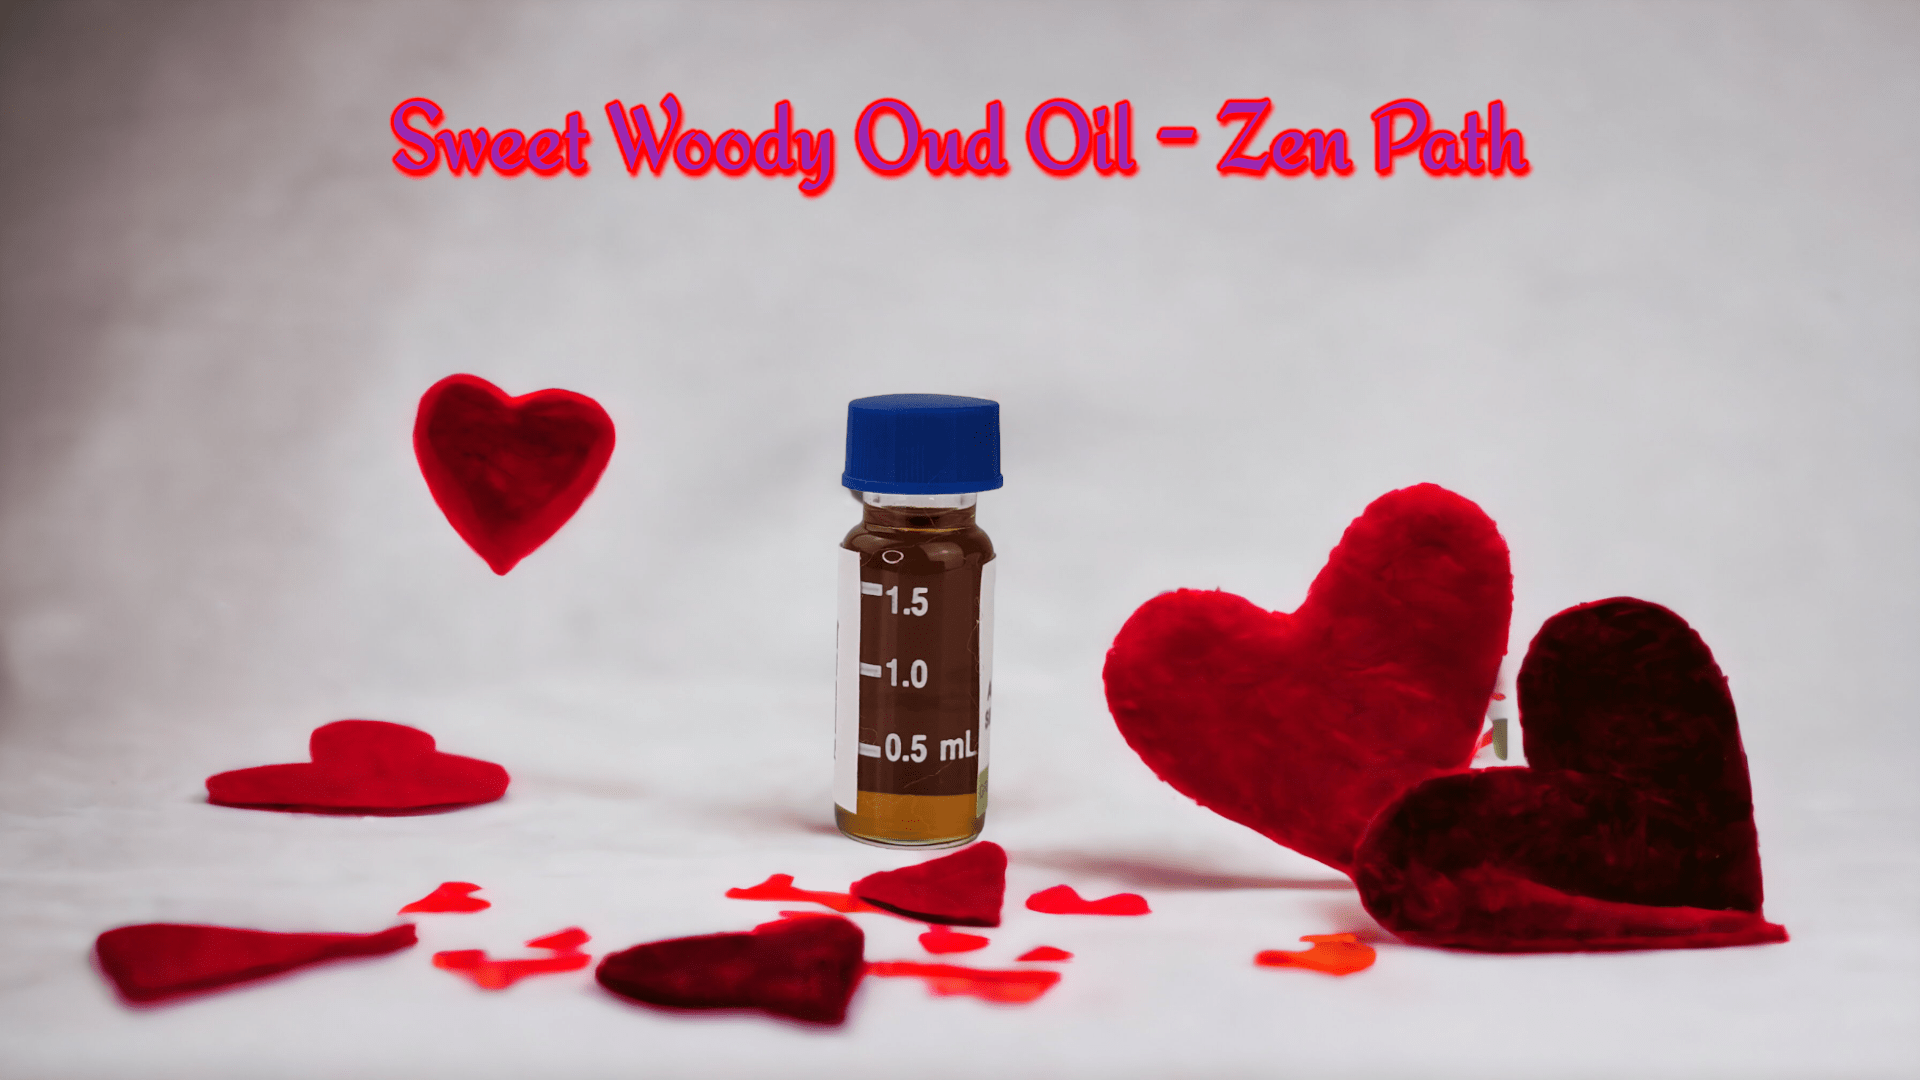 The Zen Path - Sweet Woody - Pure Oud Oil - Try this and fall in love - 1.5g